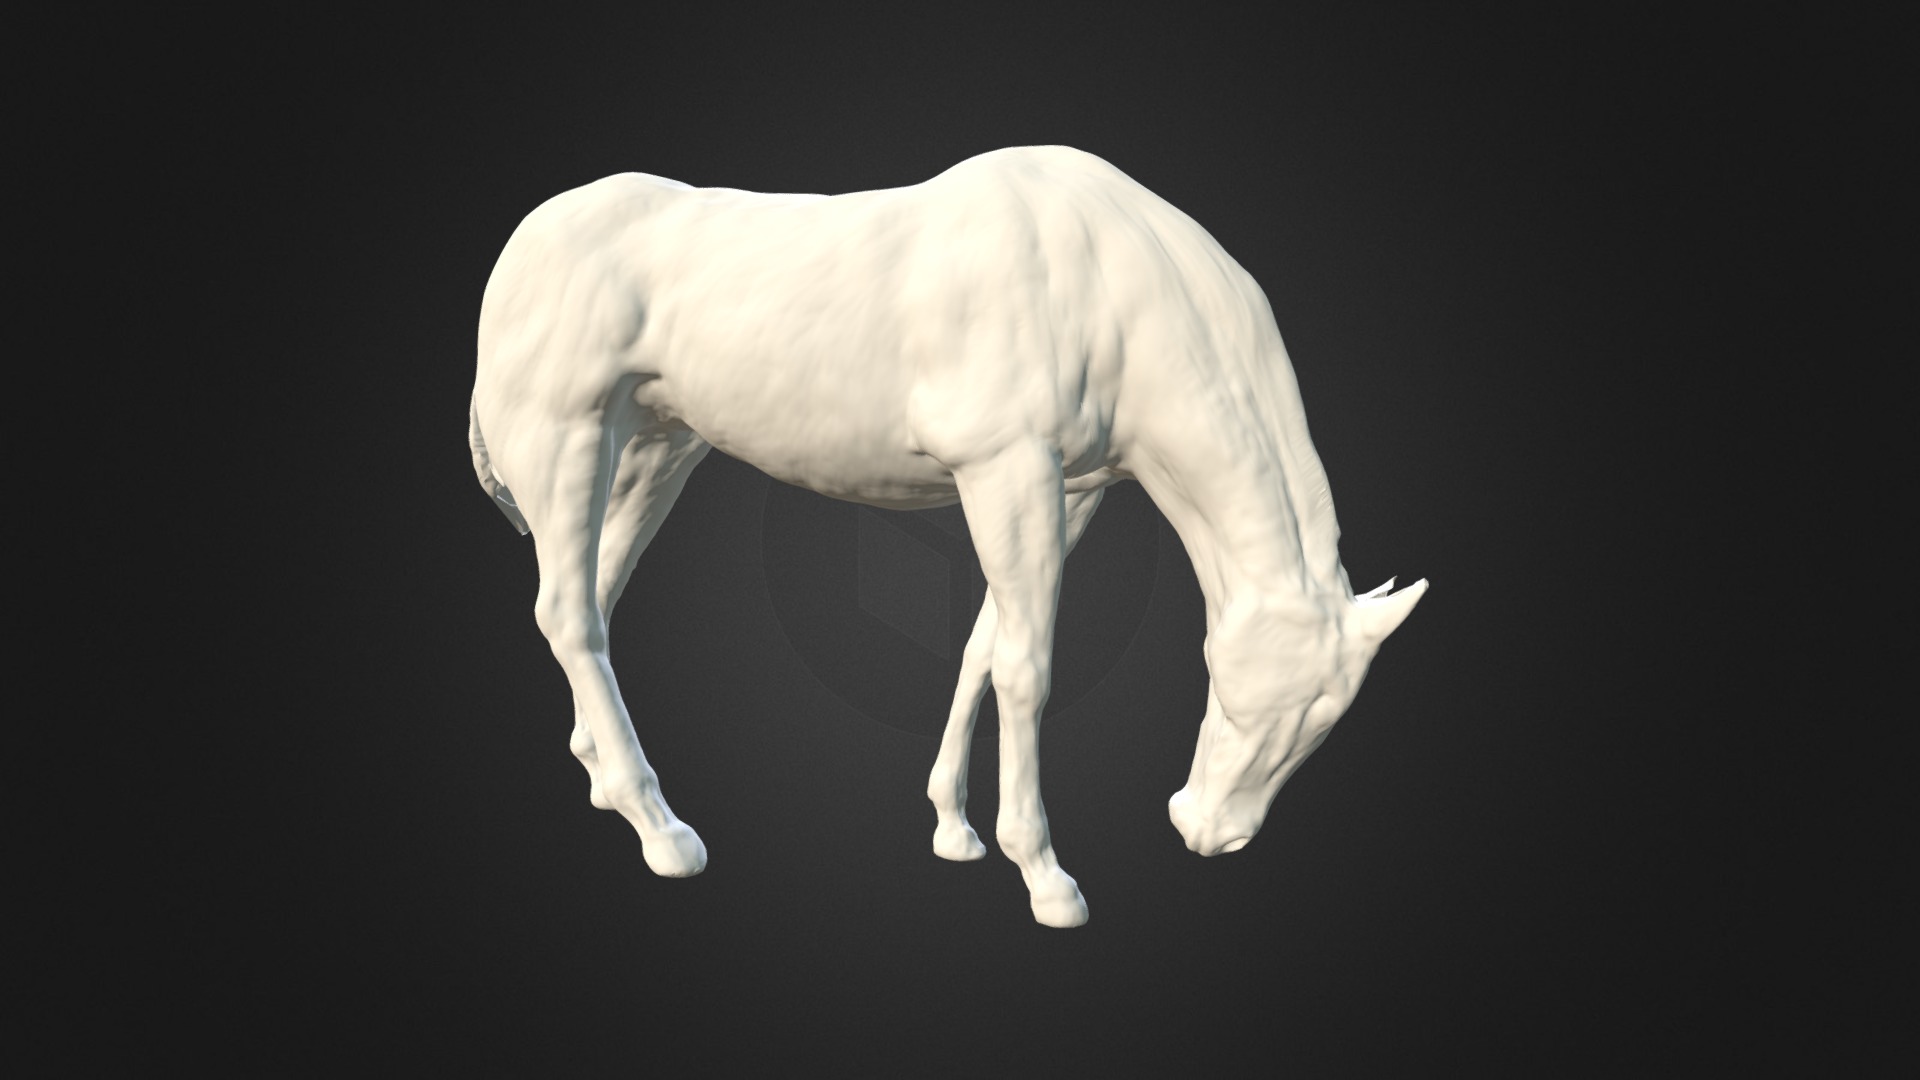 3D model Horse modelled in ZBrush - This is a 3D model of the Horse modelled in ZBrush. The 3D model is about a white horse with a black background.